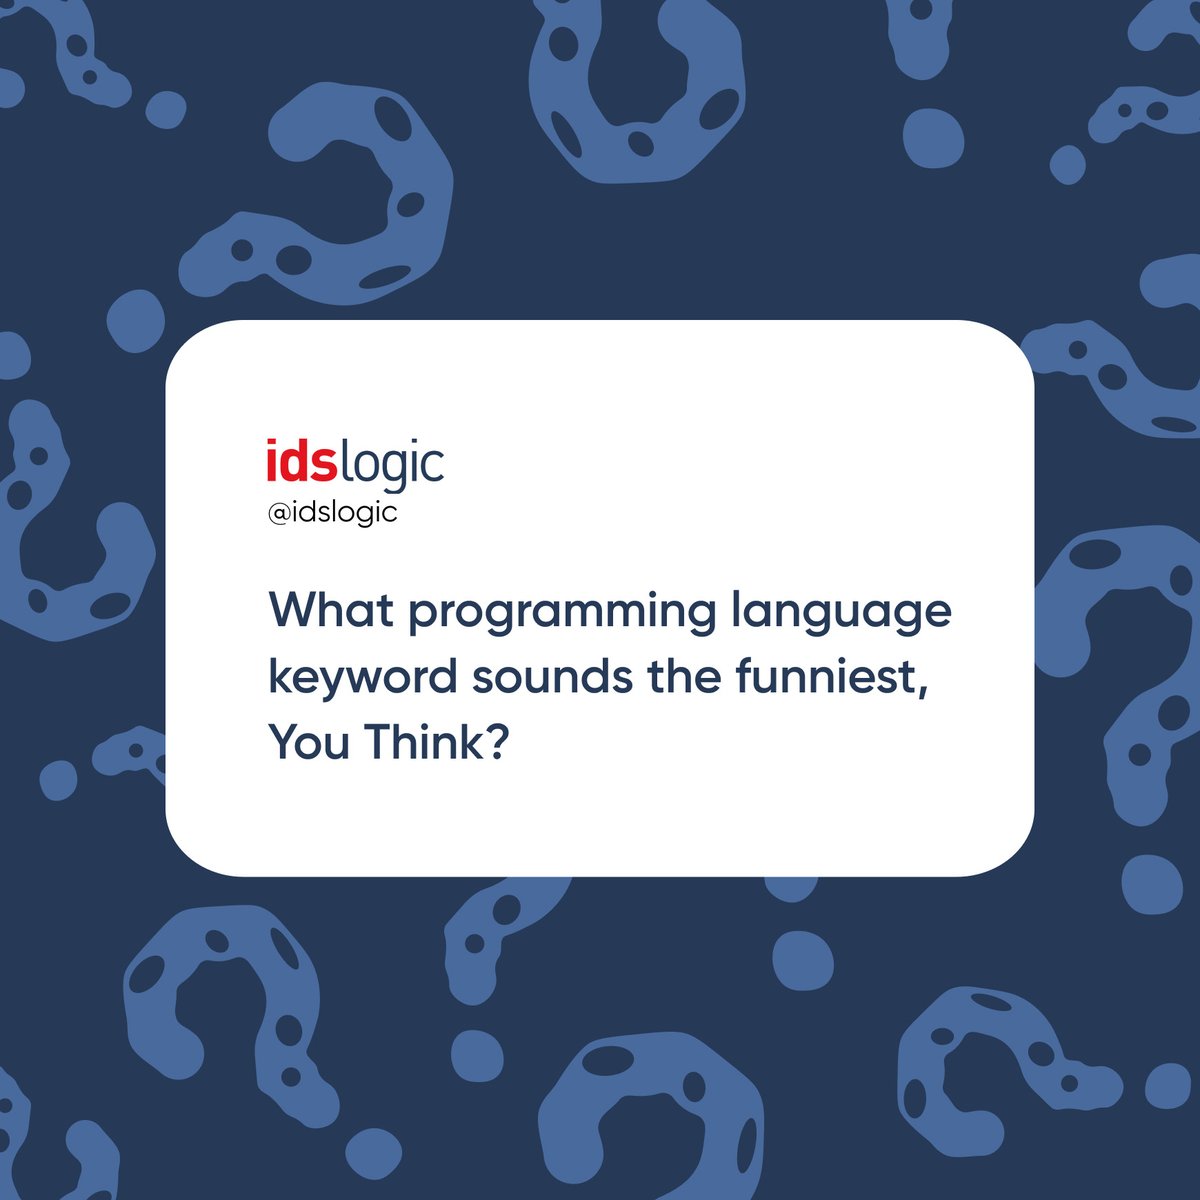 Share your thoughts on the programming language keywords that you find the funniest! Drop your ideas in the comment section.
#CodeComedy #TechKnowledge #LaughingAtKeywords #CodeEveryday #Idslogic